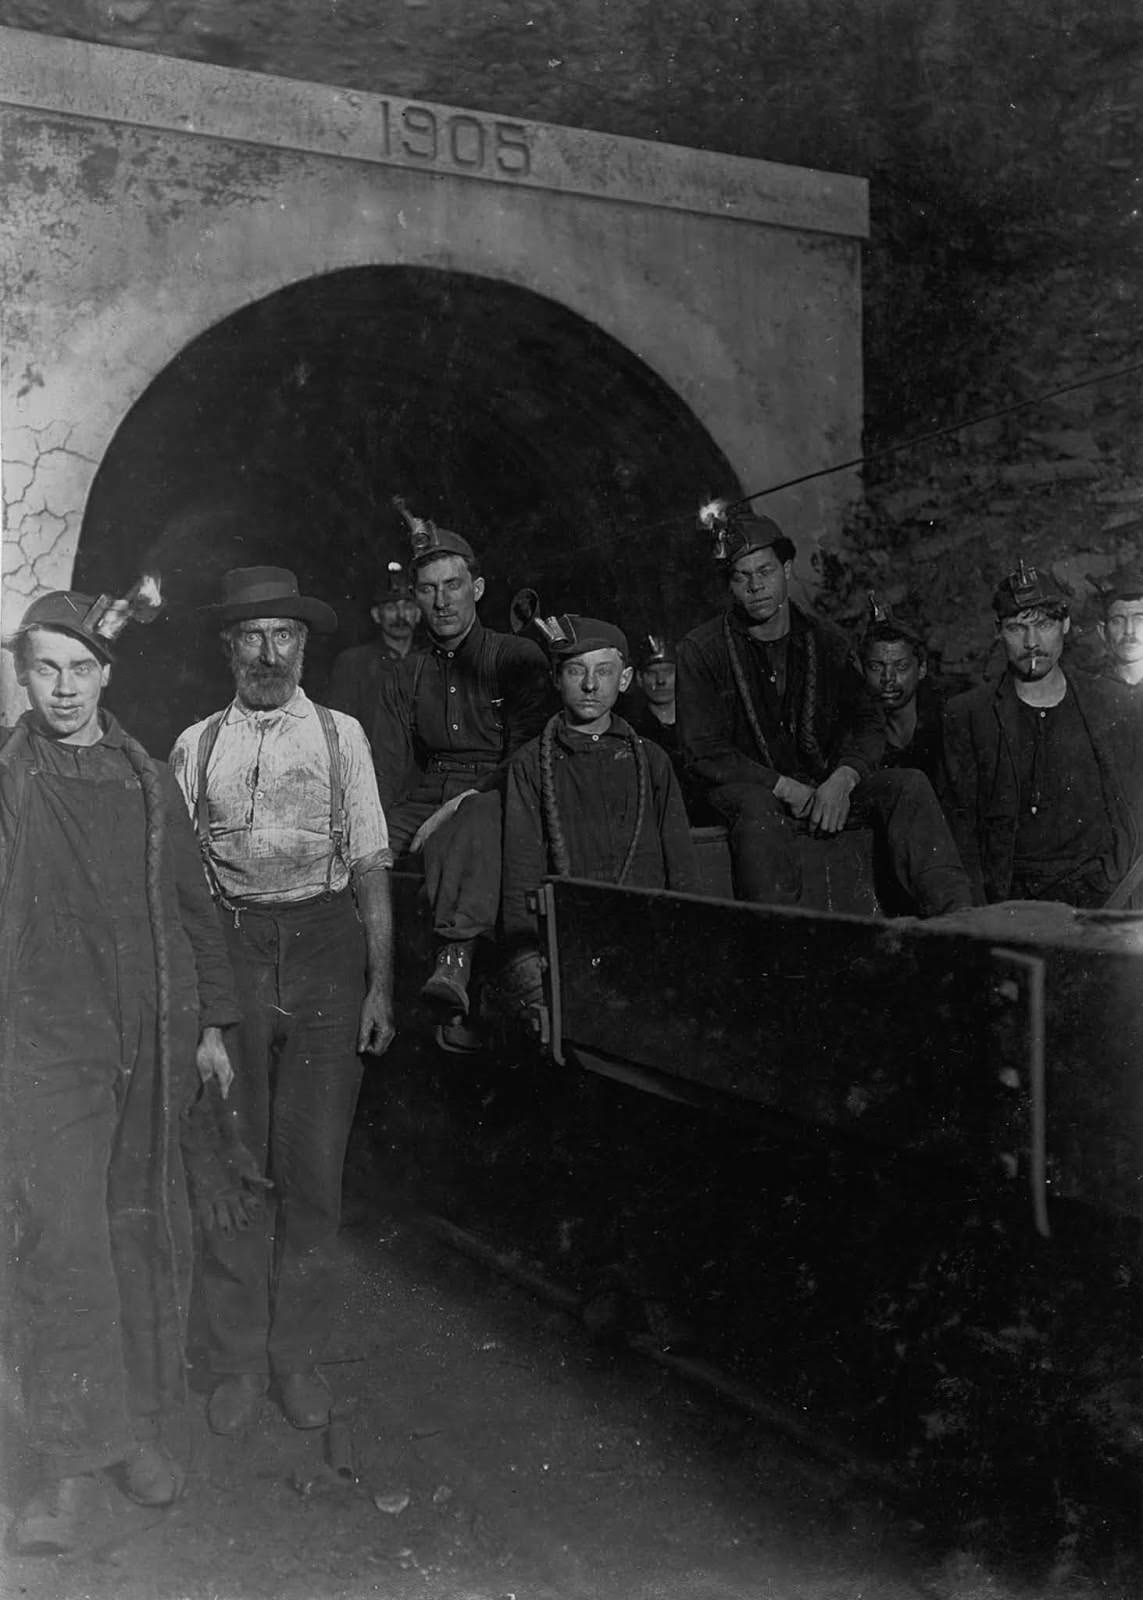 At the entrance to a West Virginia mine, 1908